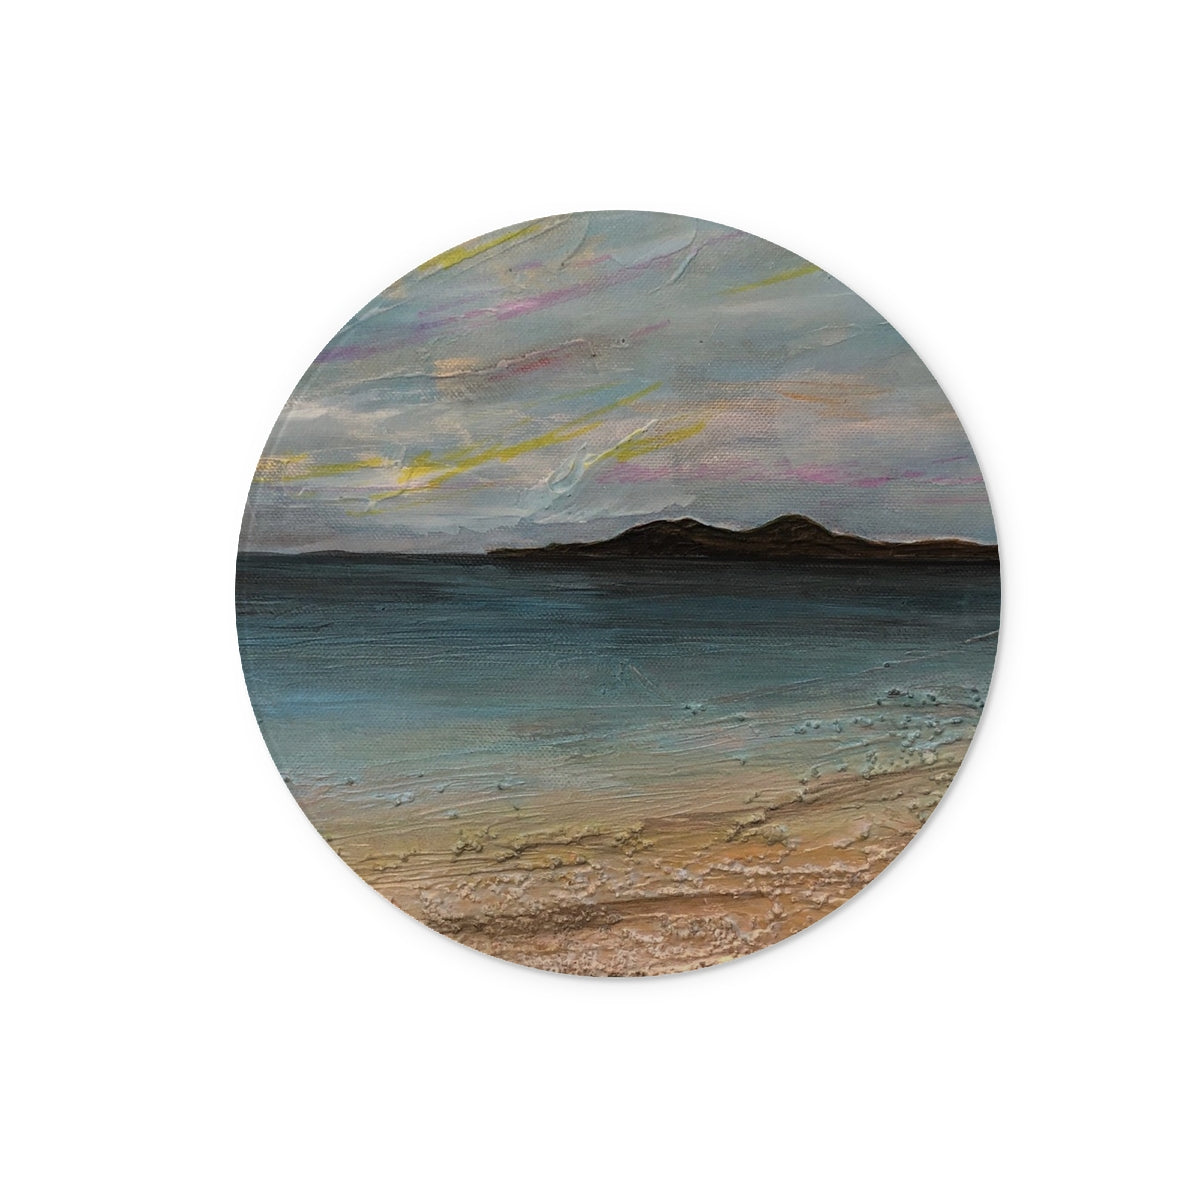 Garrynamonie Beach South Uist Art Gifts Glass Chopping Board-Glass Chopping Boards-Hebridean Islands Art Gallery-12" Round-Paintings, Prints, Homeware, Art Gifts From Scotland By Scottish Artist Kevin Hunter